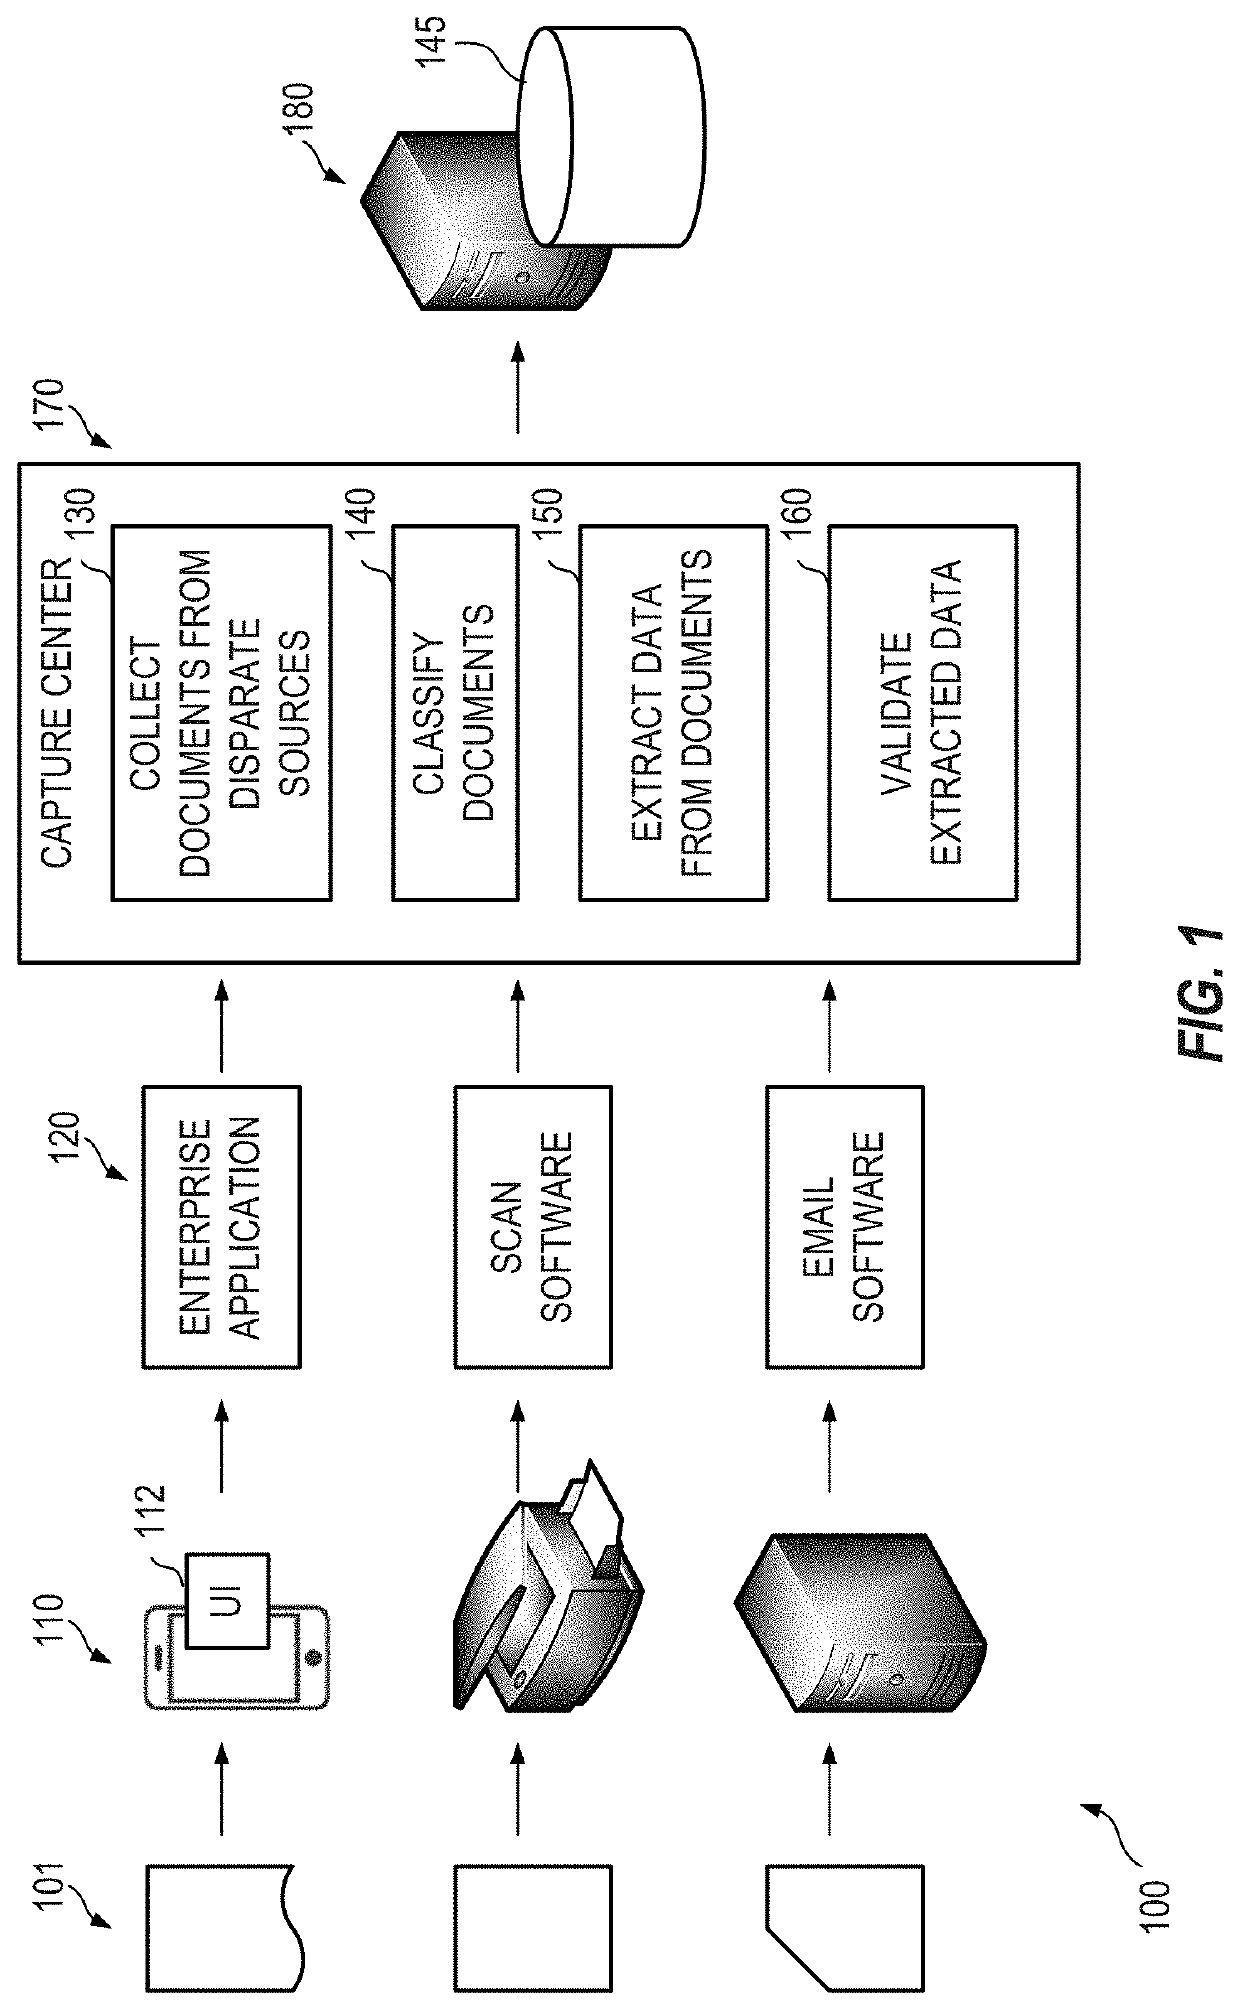 Systems and methods for on-image navigation and direct image-to-data storage table data capture